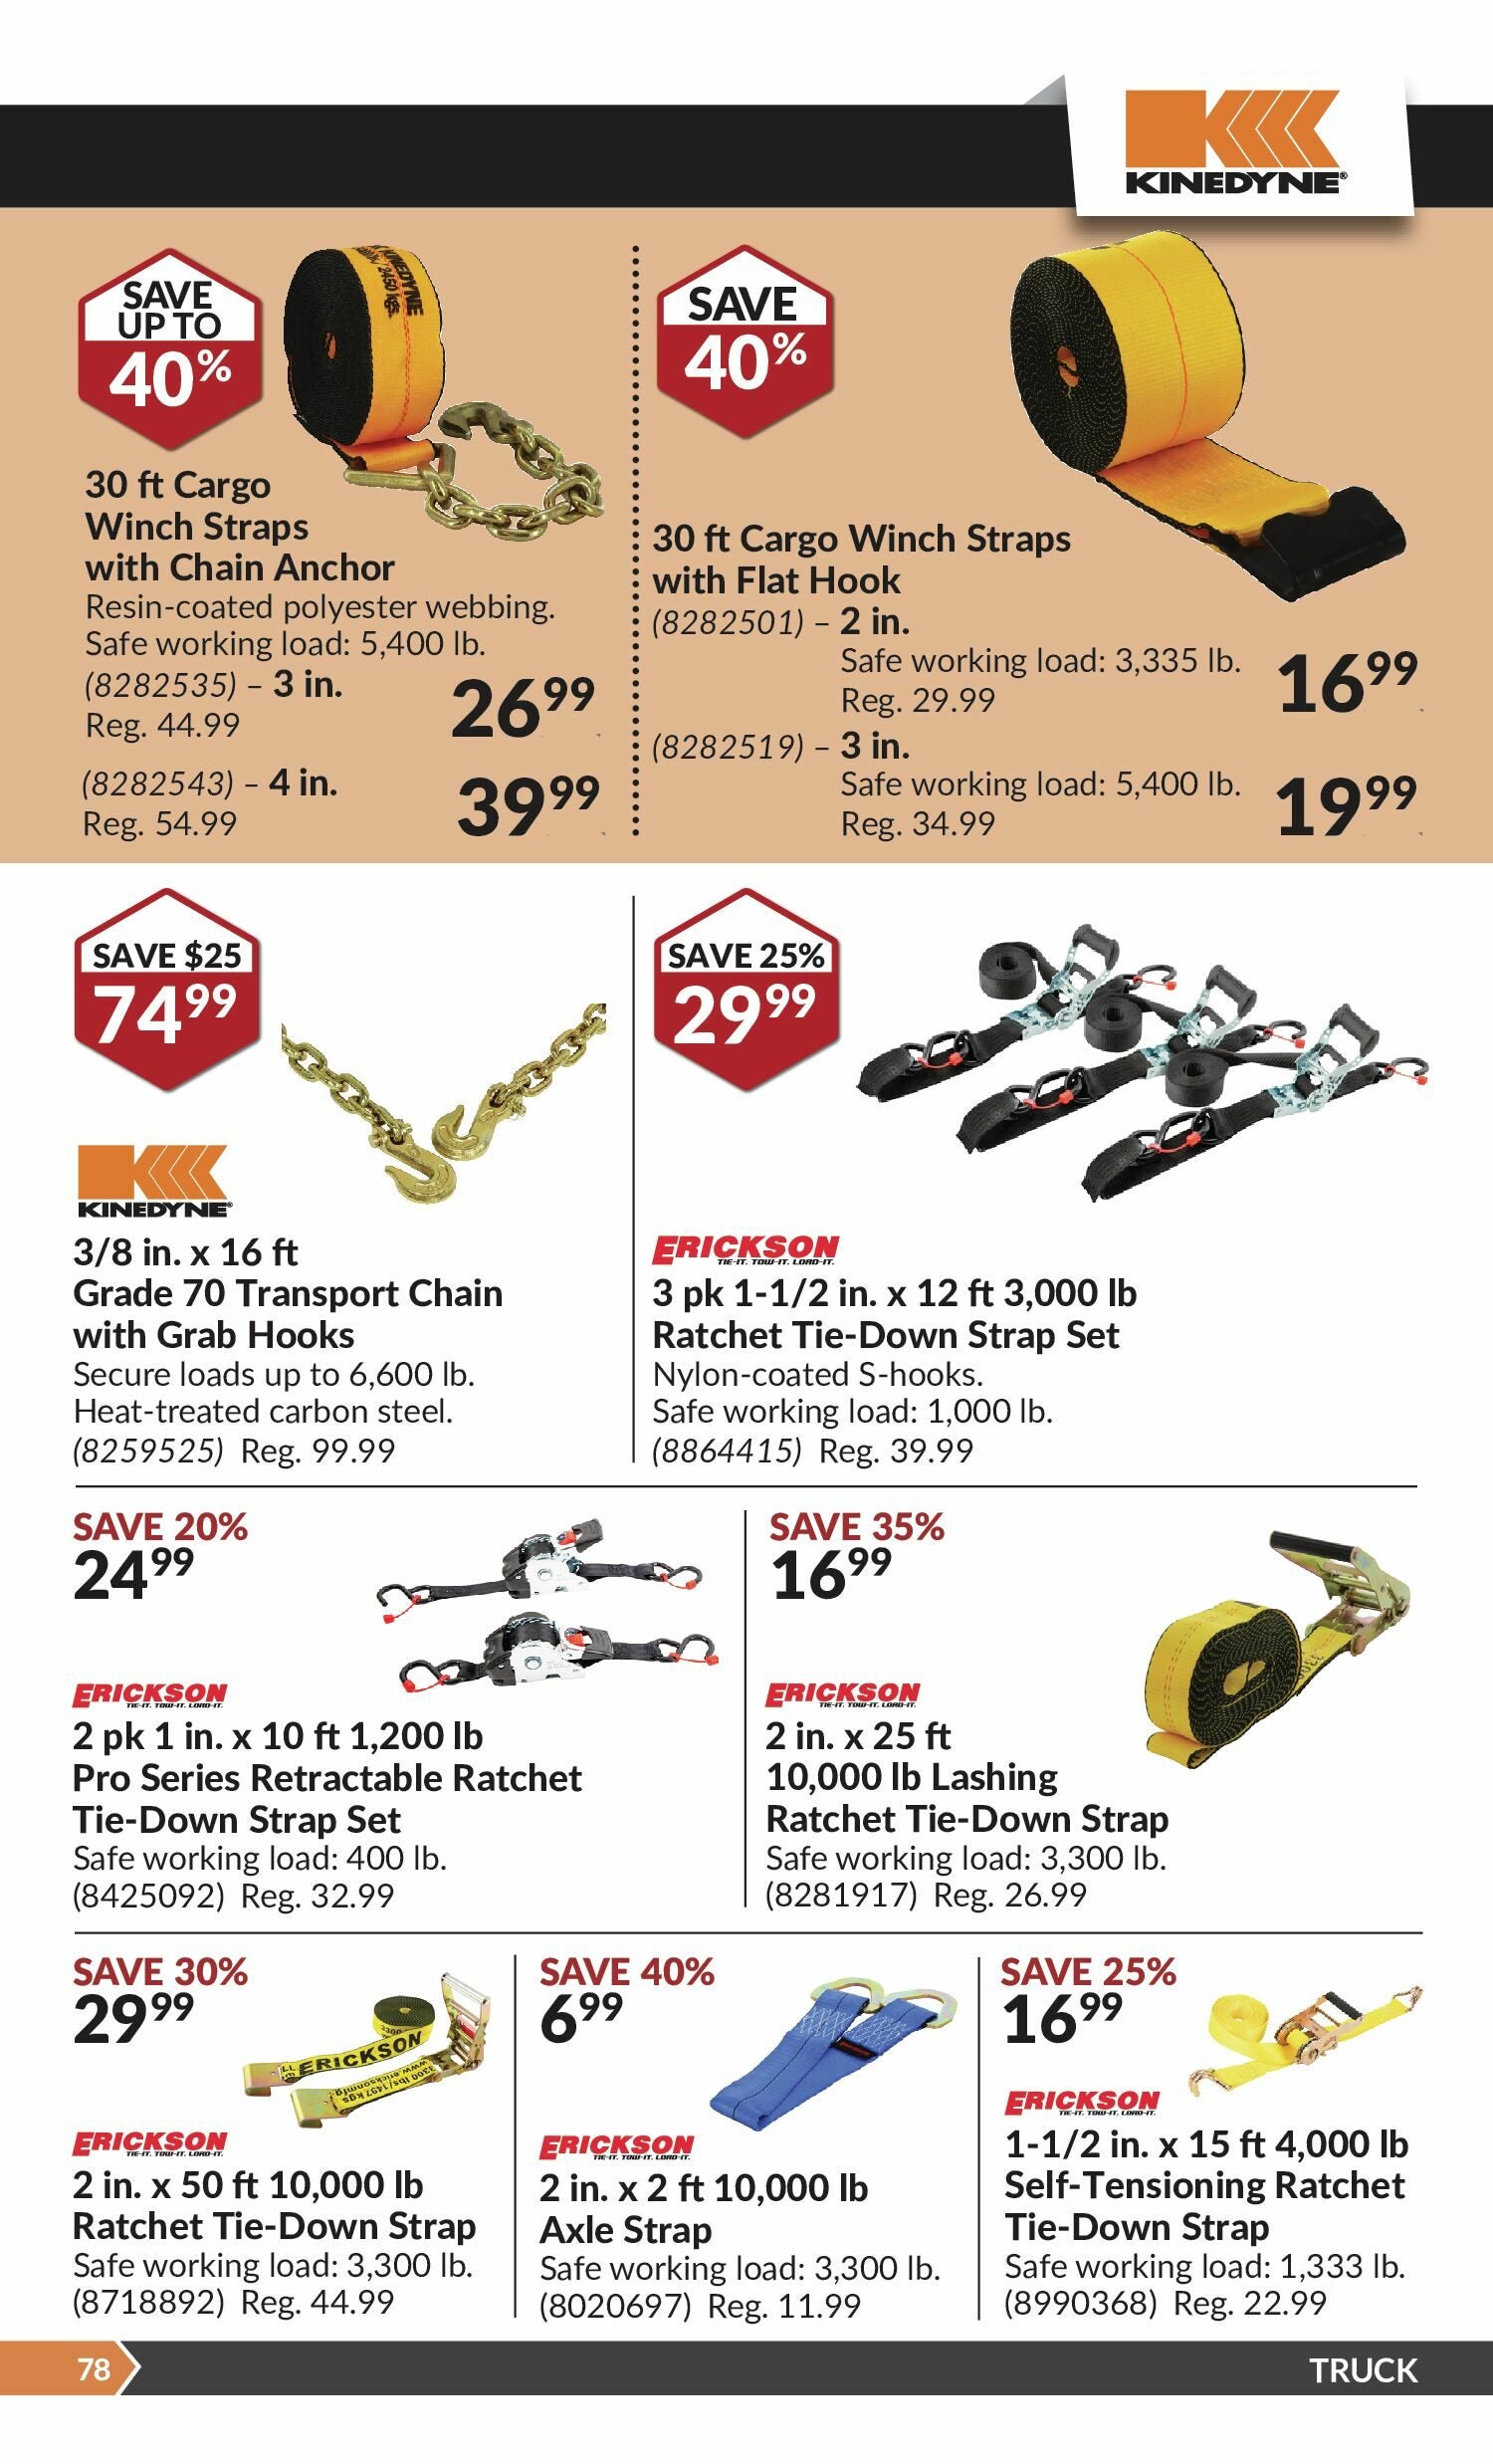 Princess Auto Weekly Flyer - 2 Week Sale - Great Finds For The Season - Aug  29 – Sep 10 